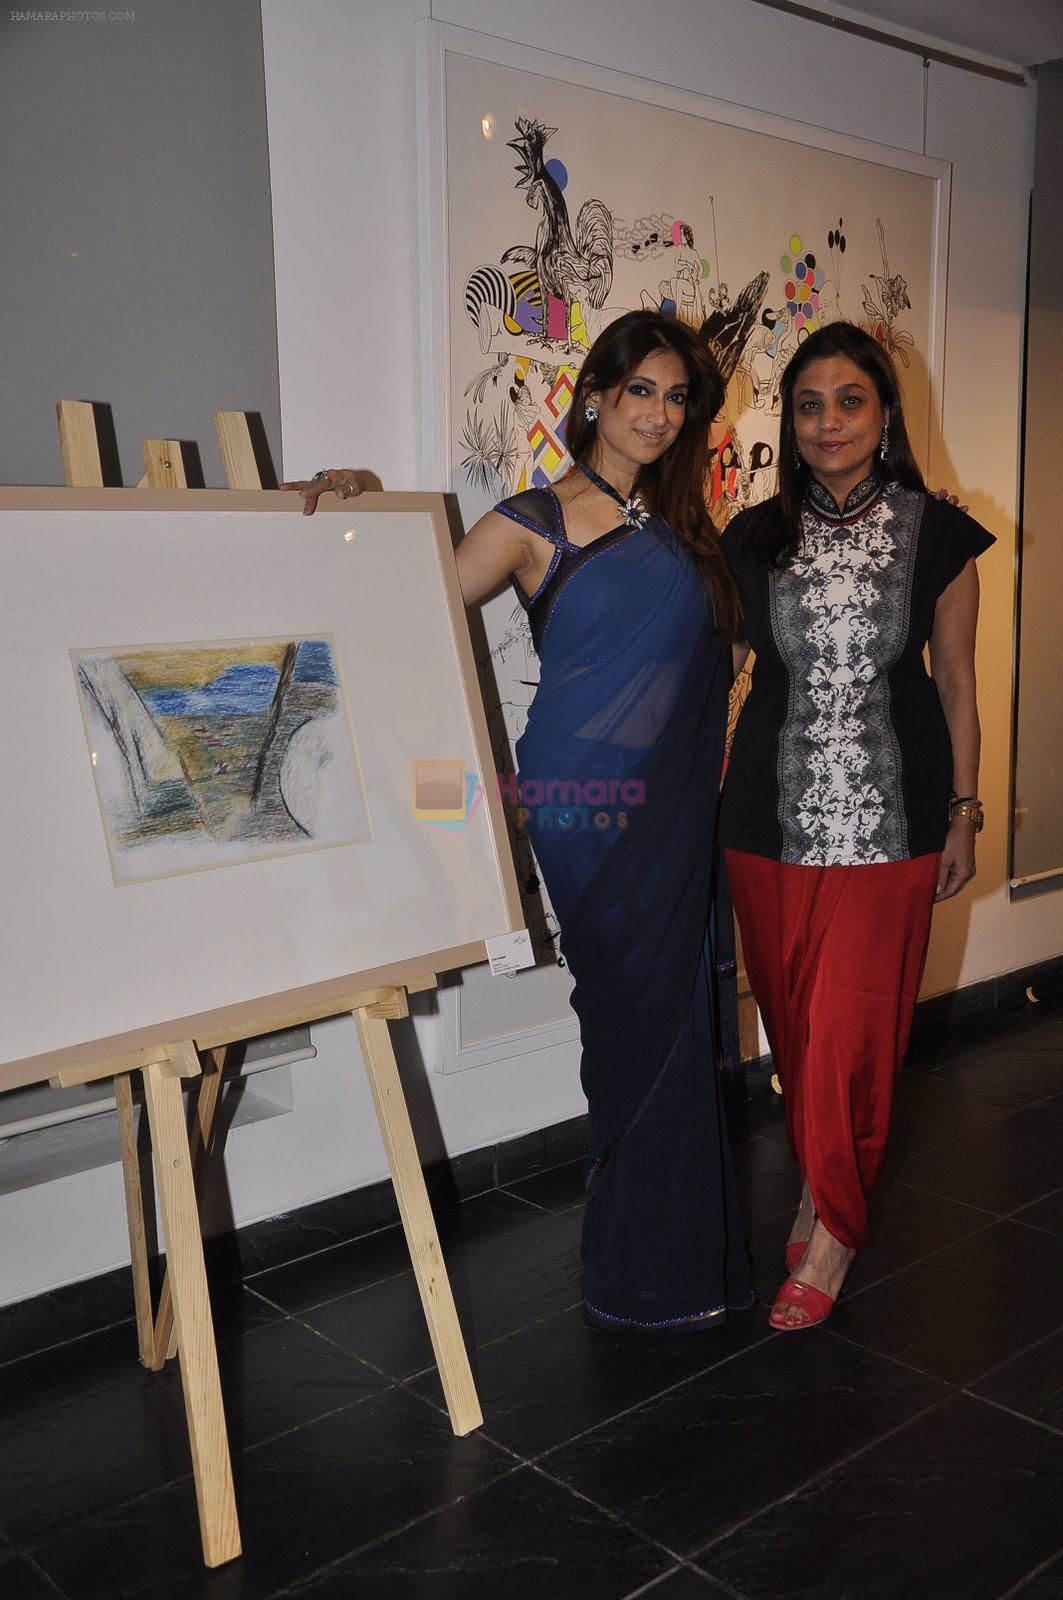 Lucky Morani at Khushii art event in Tao Art Gallery on 22nd Nov 2014